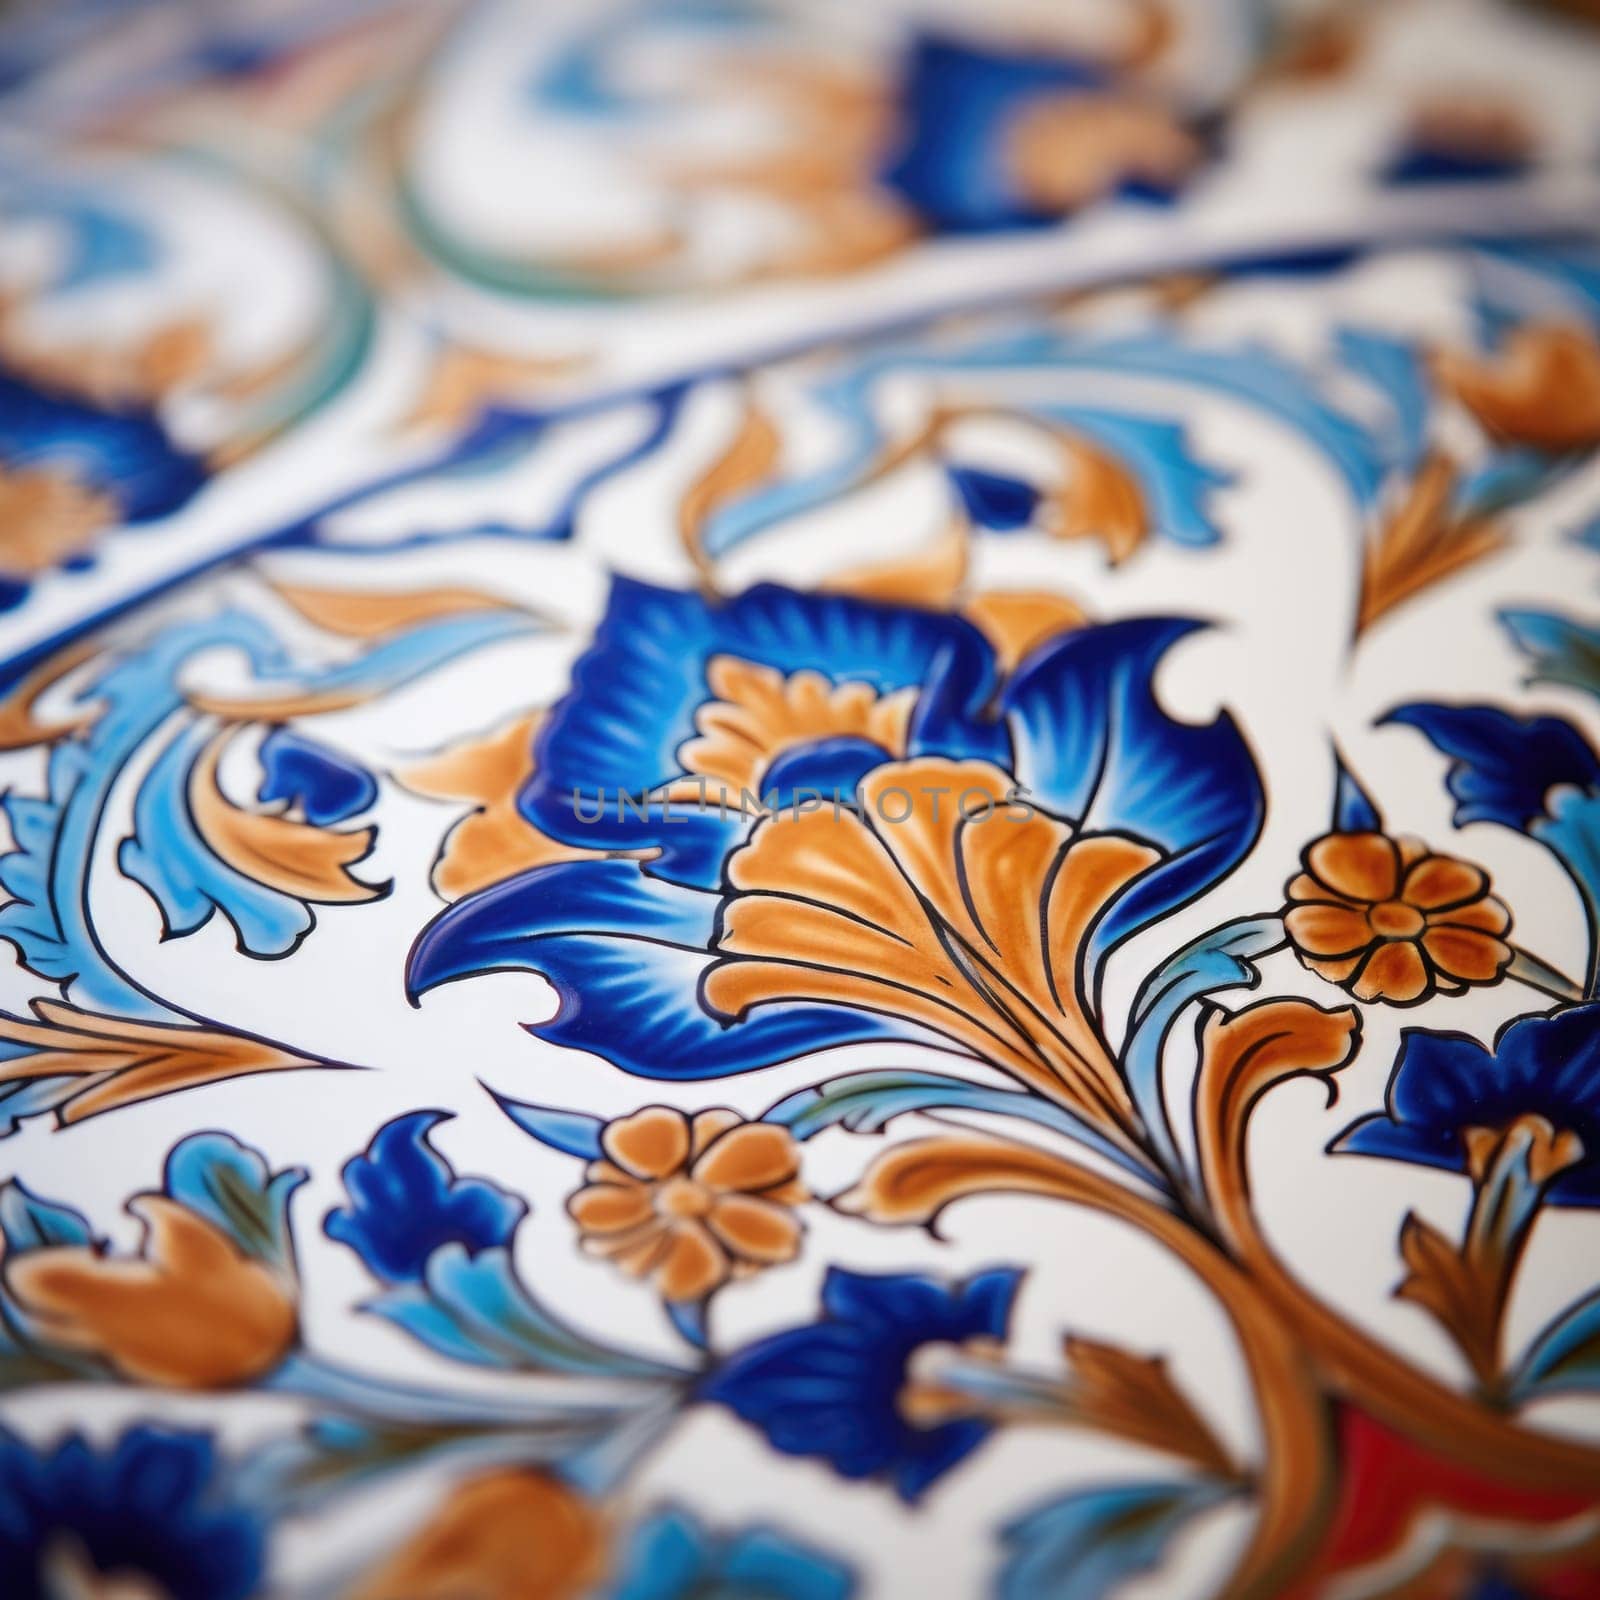 A close up of a decorative plate with blue and orange flowers, AI by starush